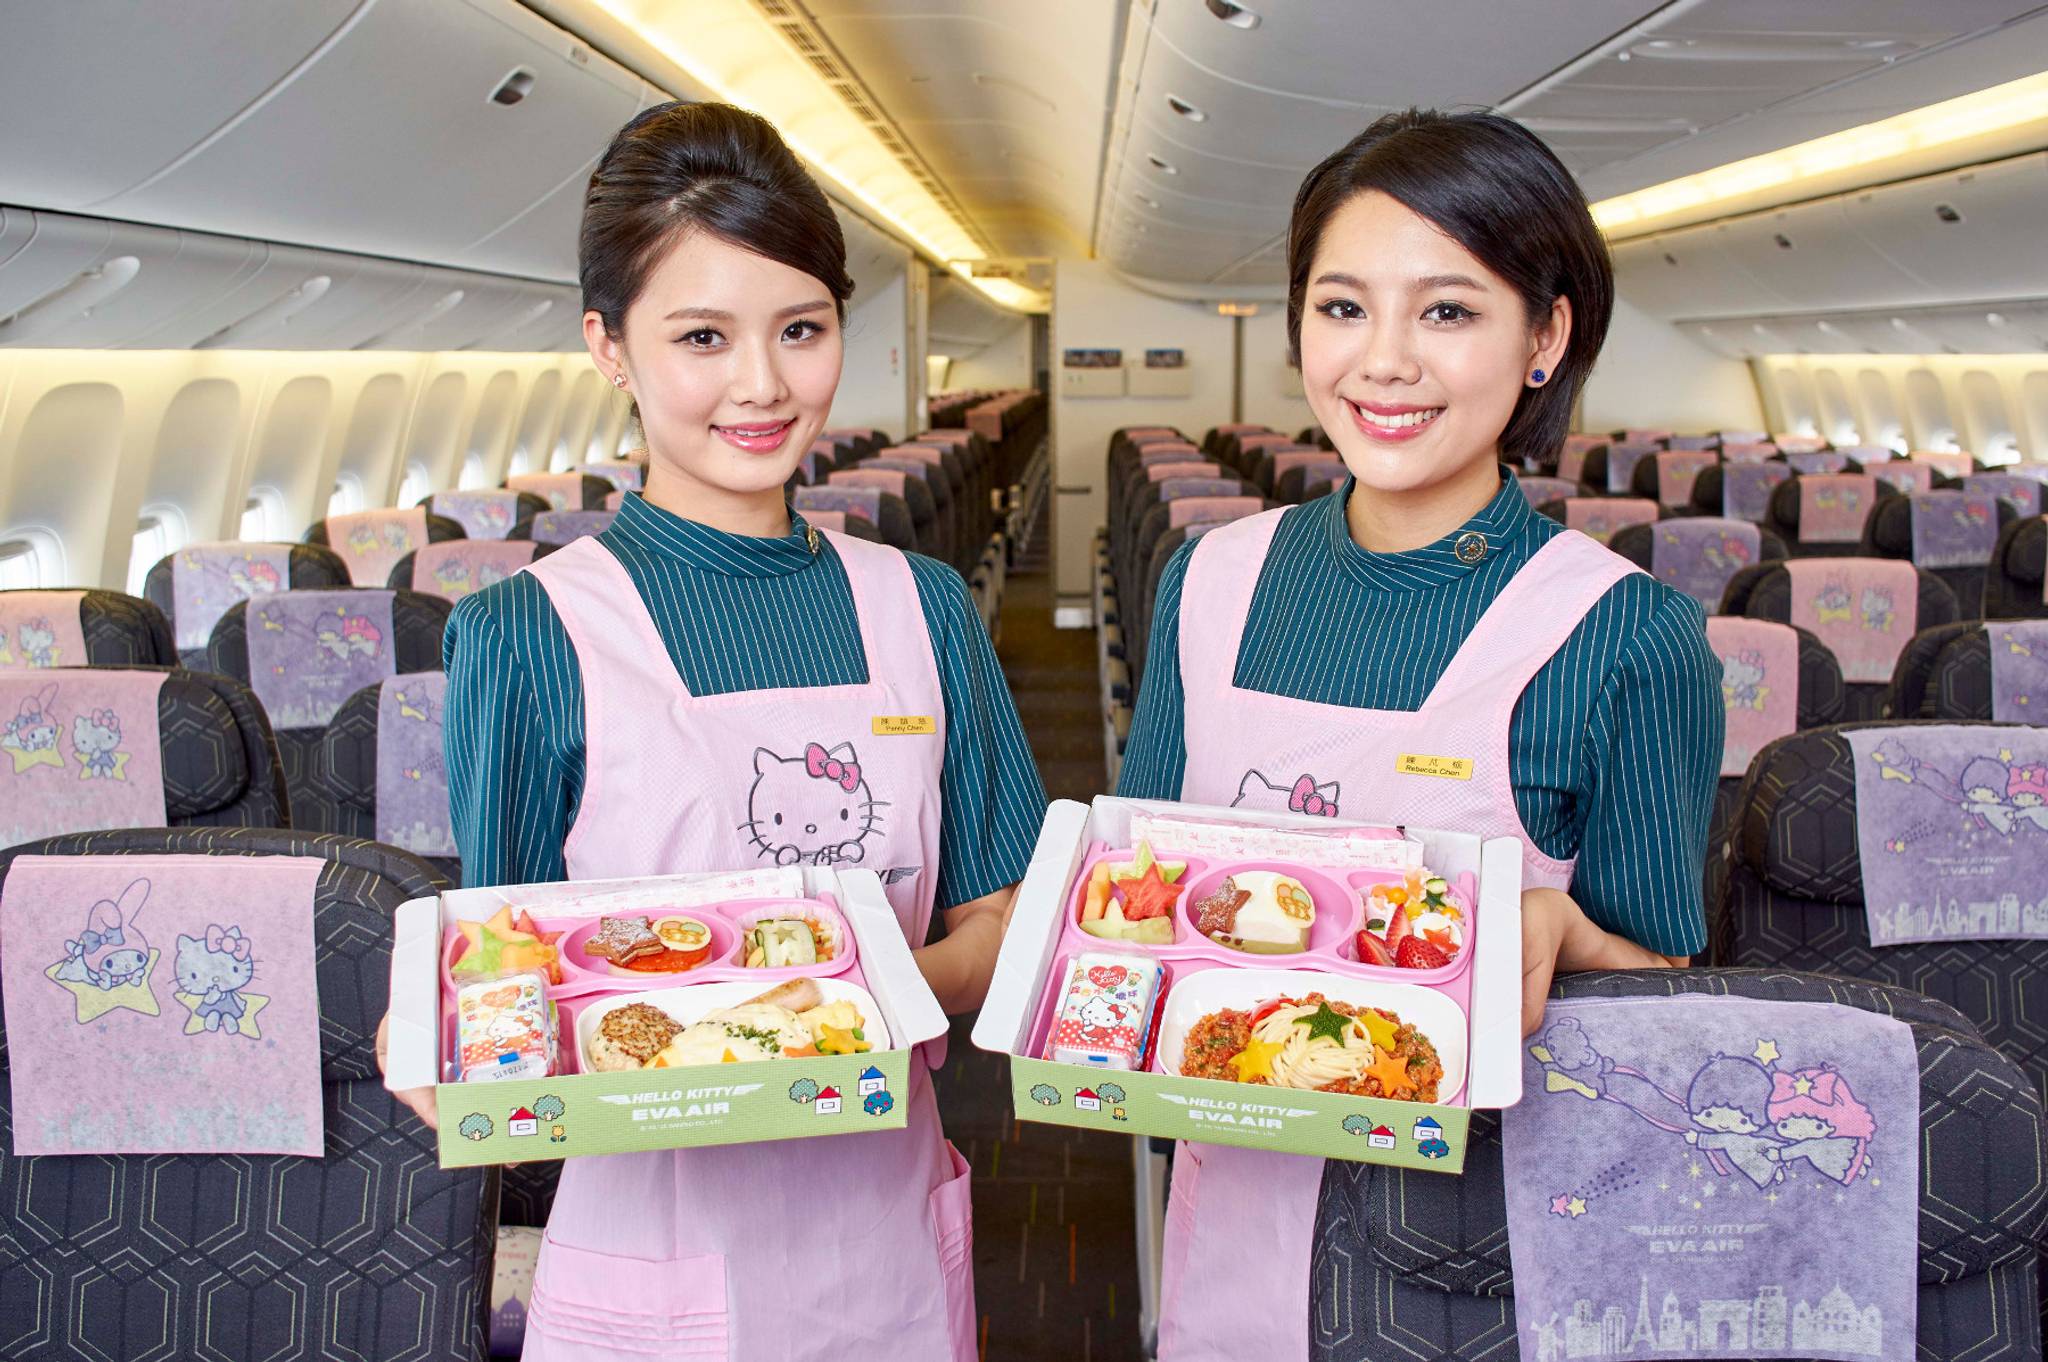 EVA Air launches Hello Kitty-themed plane in China